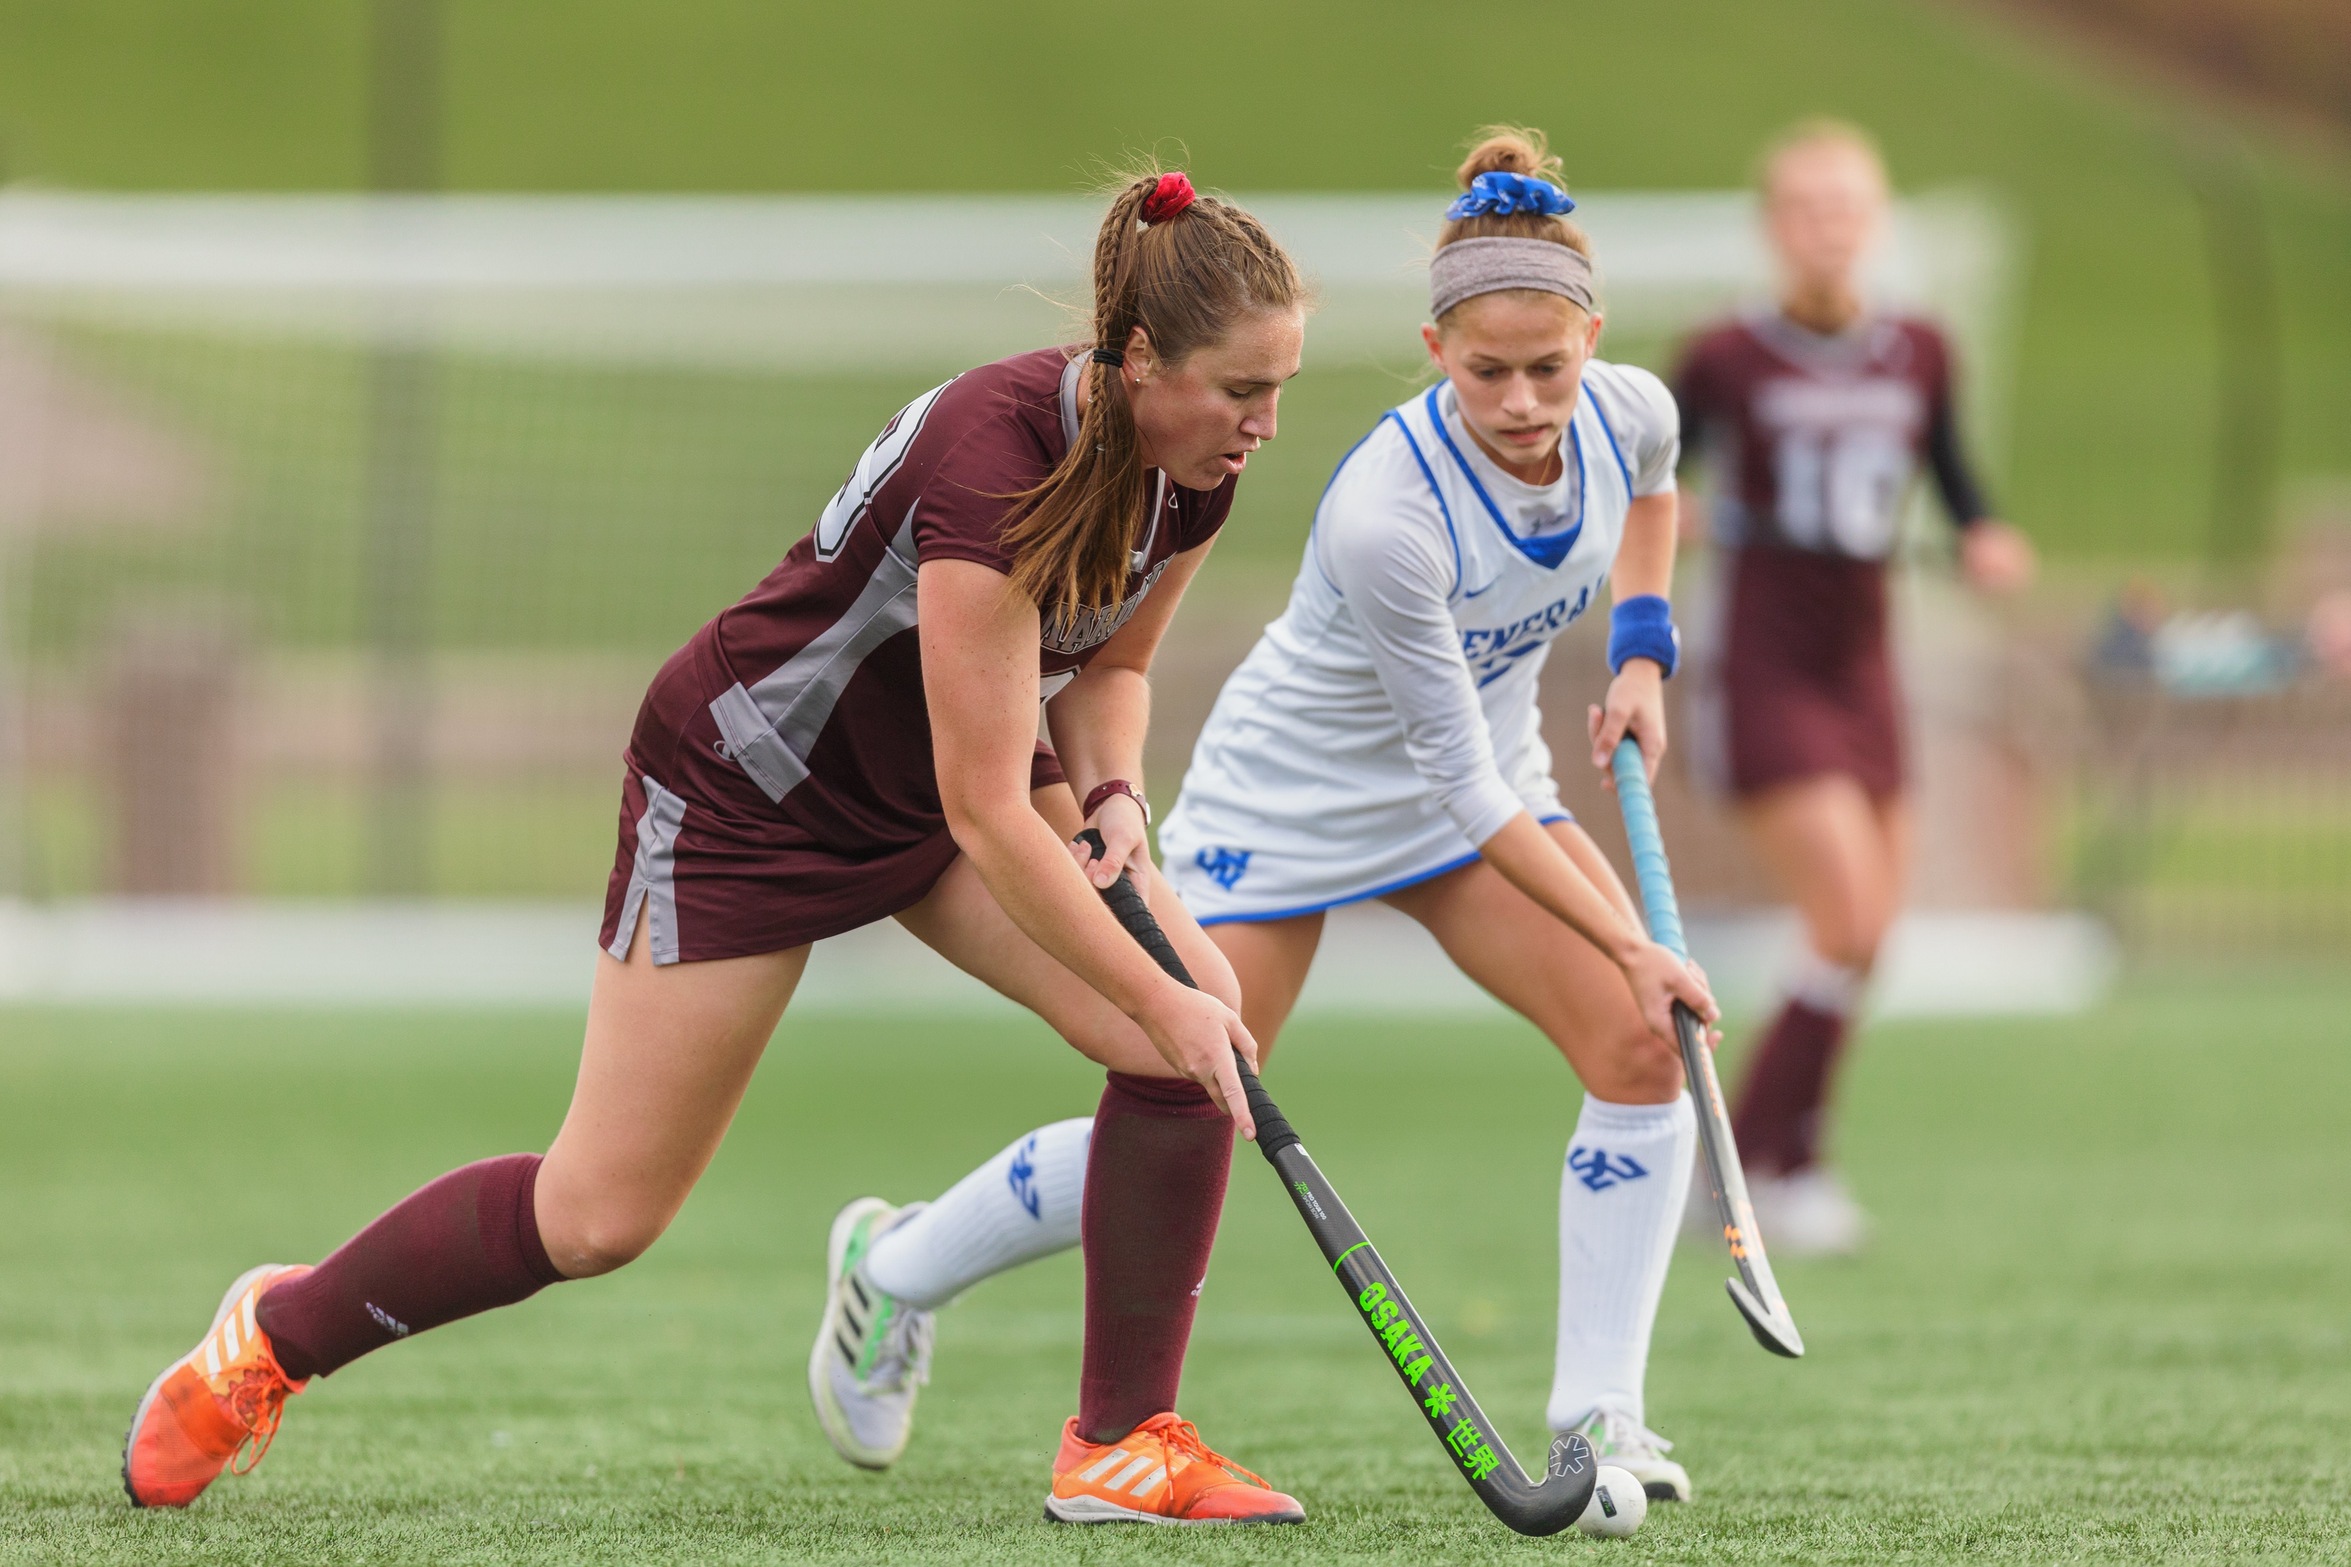 No. 17 Washington and Lee Escapes With 2-1 Overtime Win Over Maroons